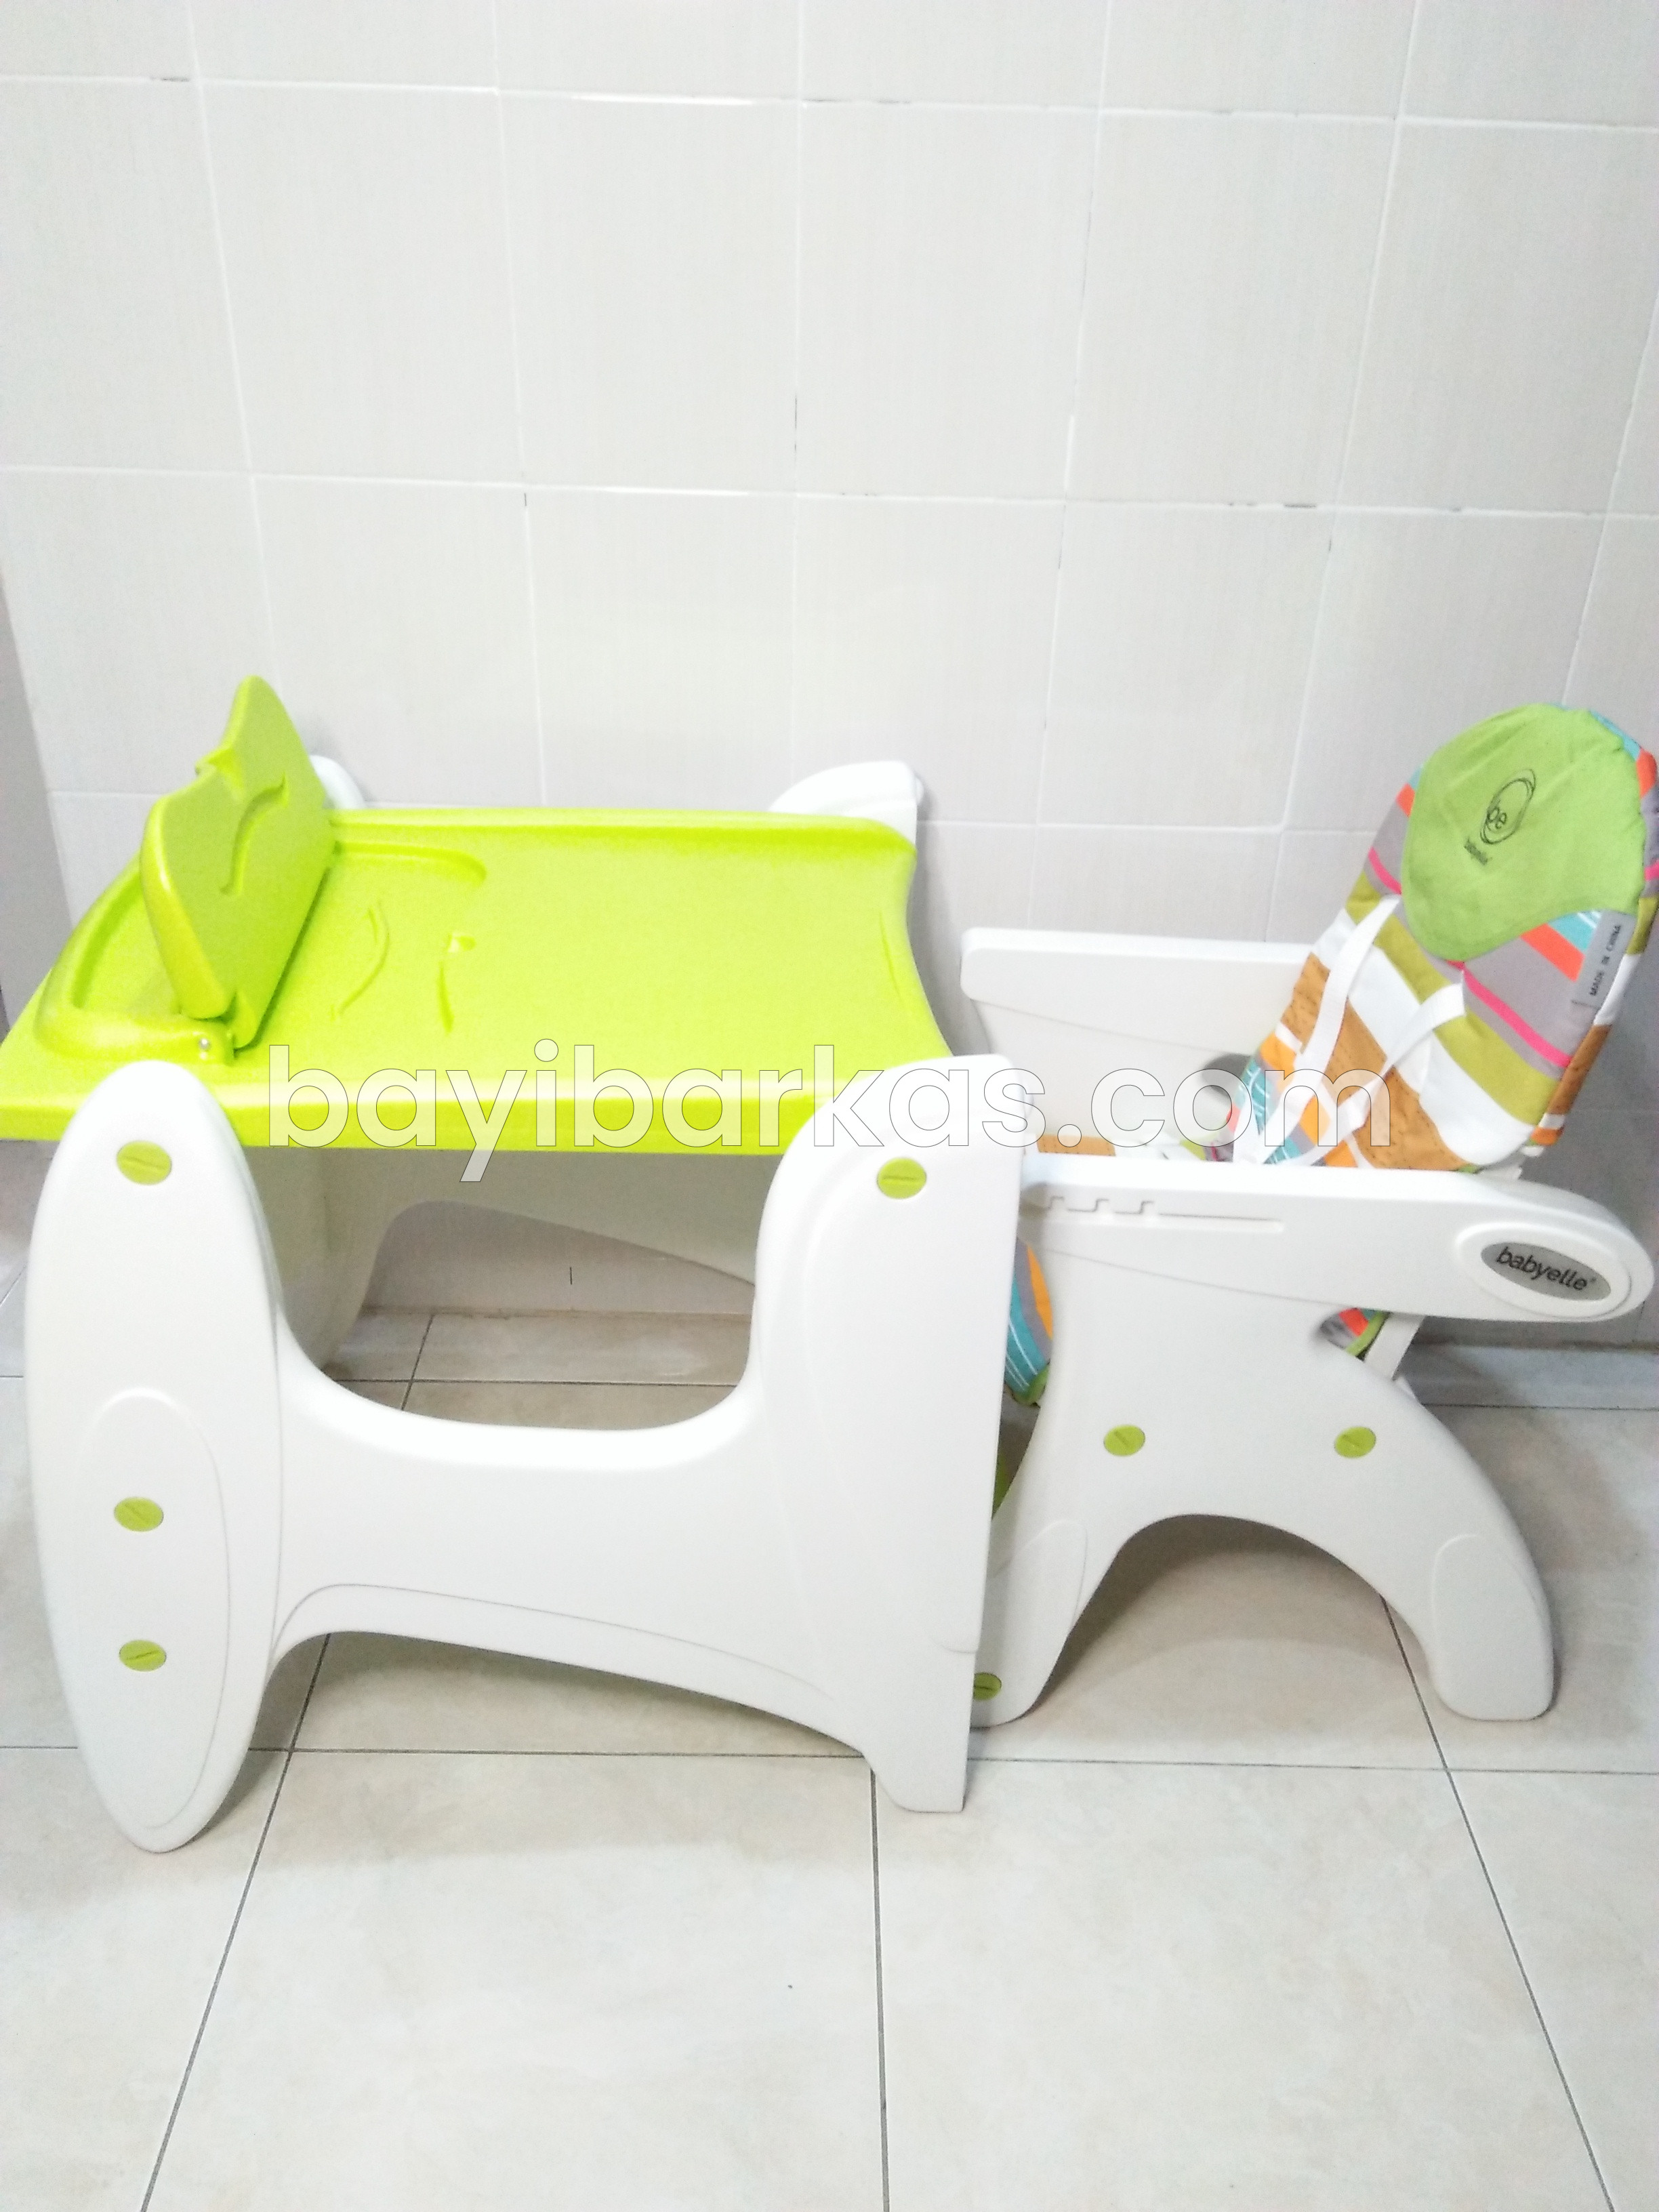 High chair Festival 2in1 BABY ELLE 'be-01' *Second